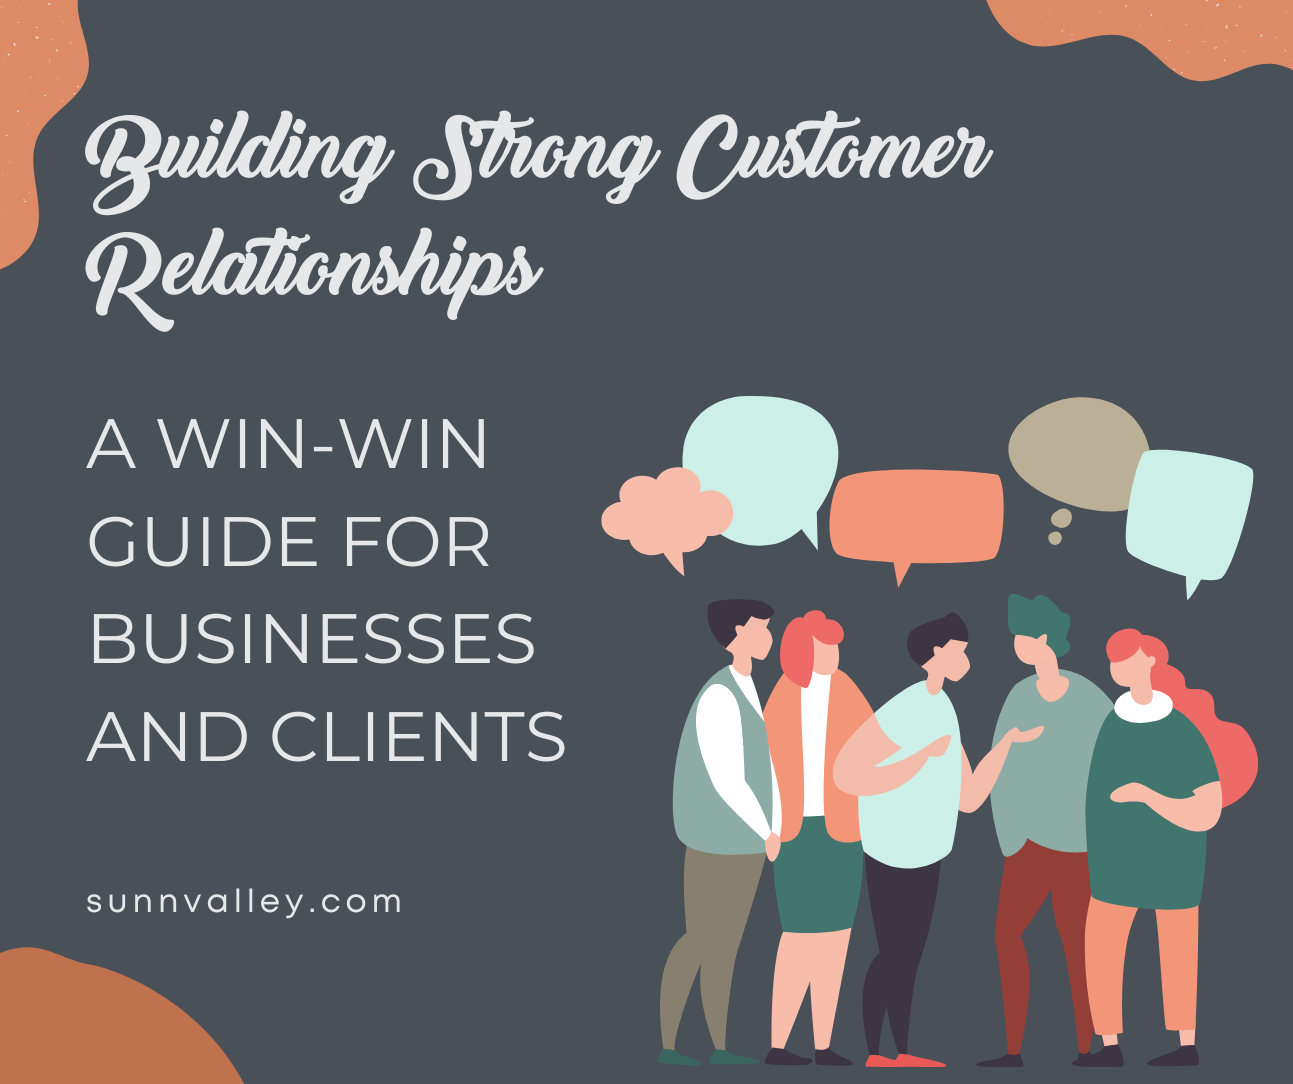 Building Strong Customer Relationships